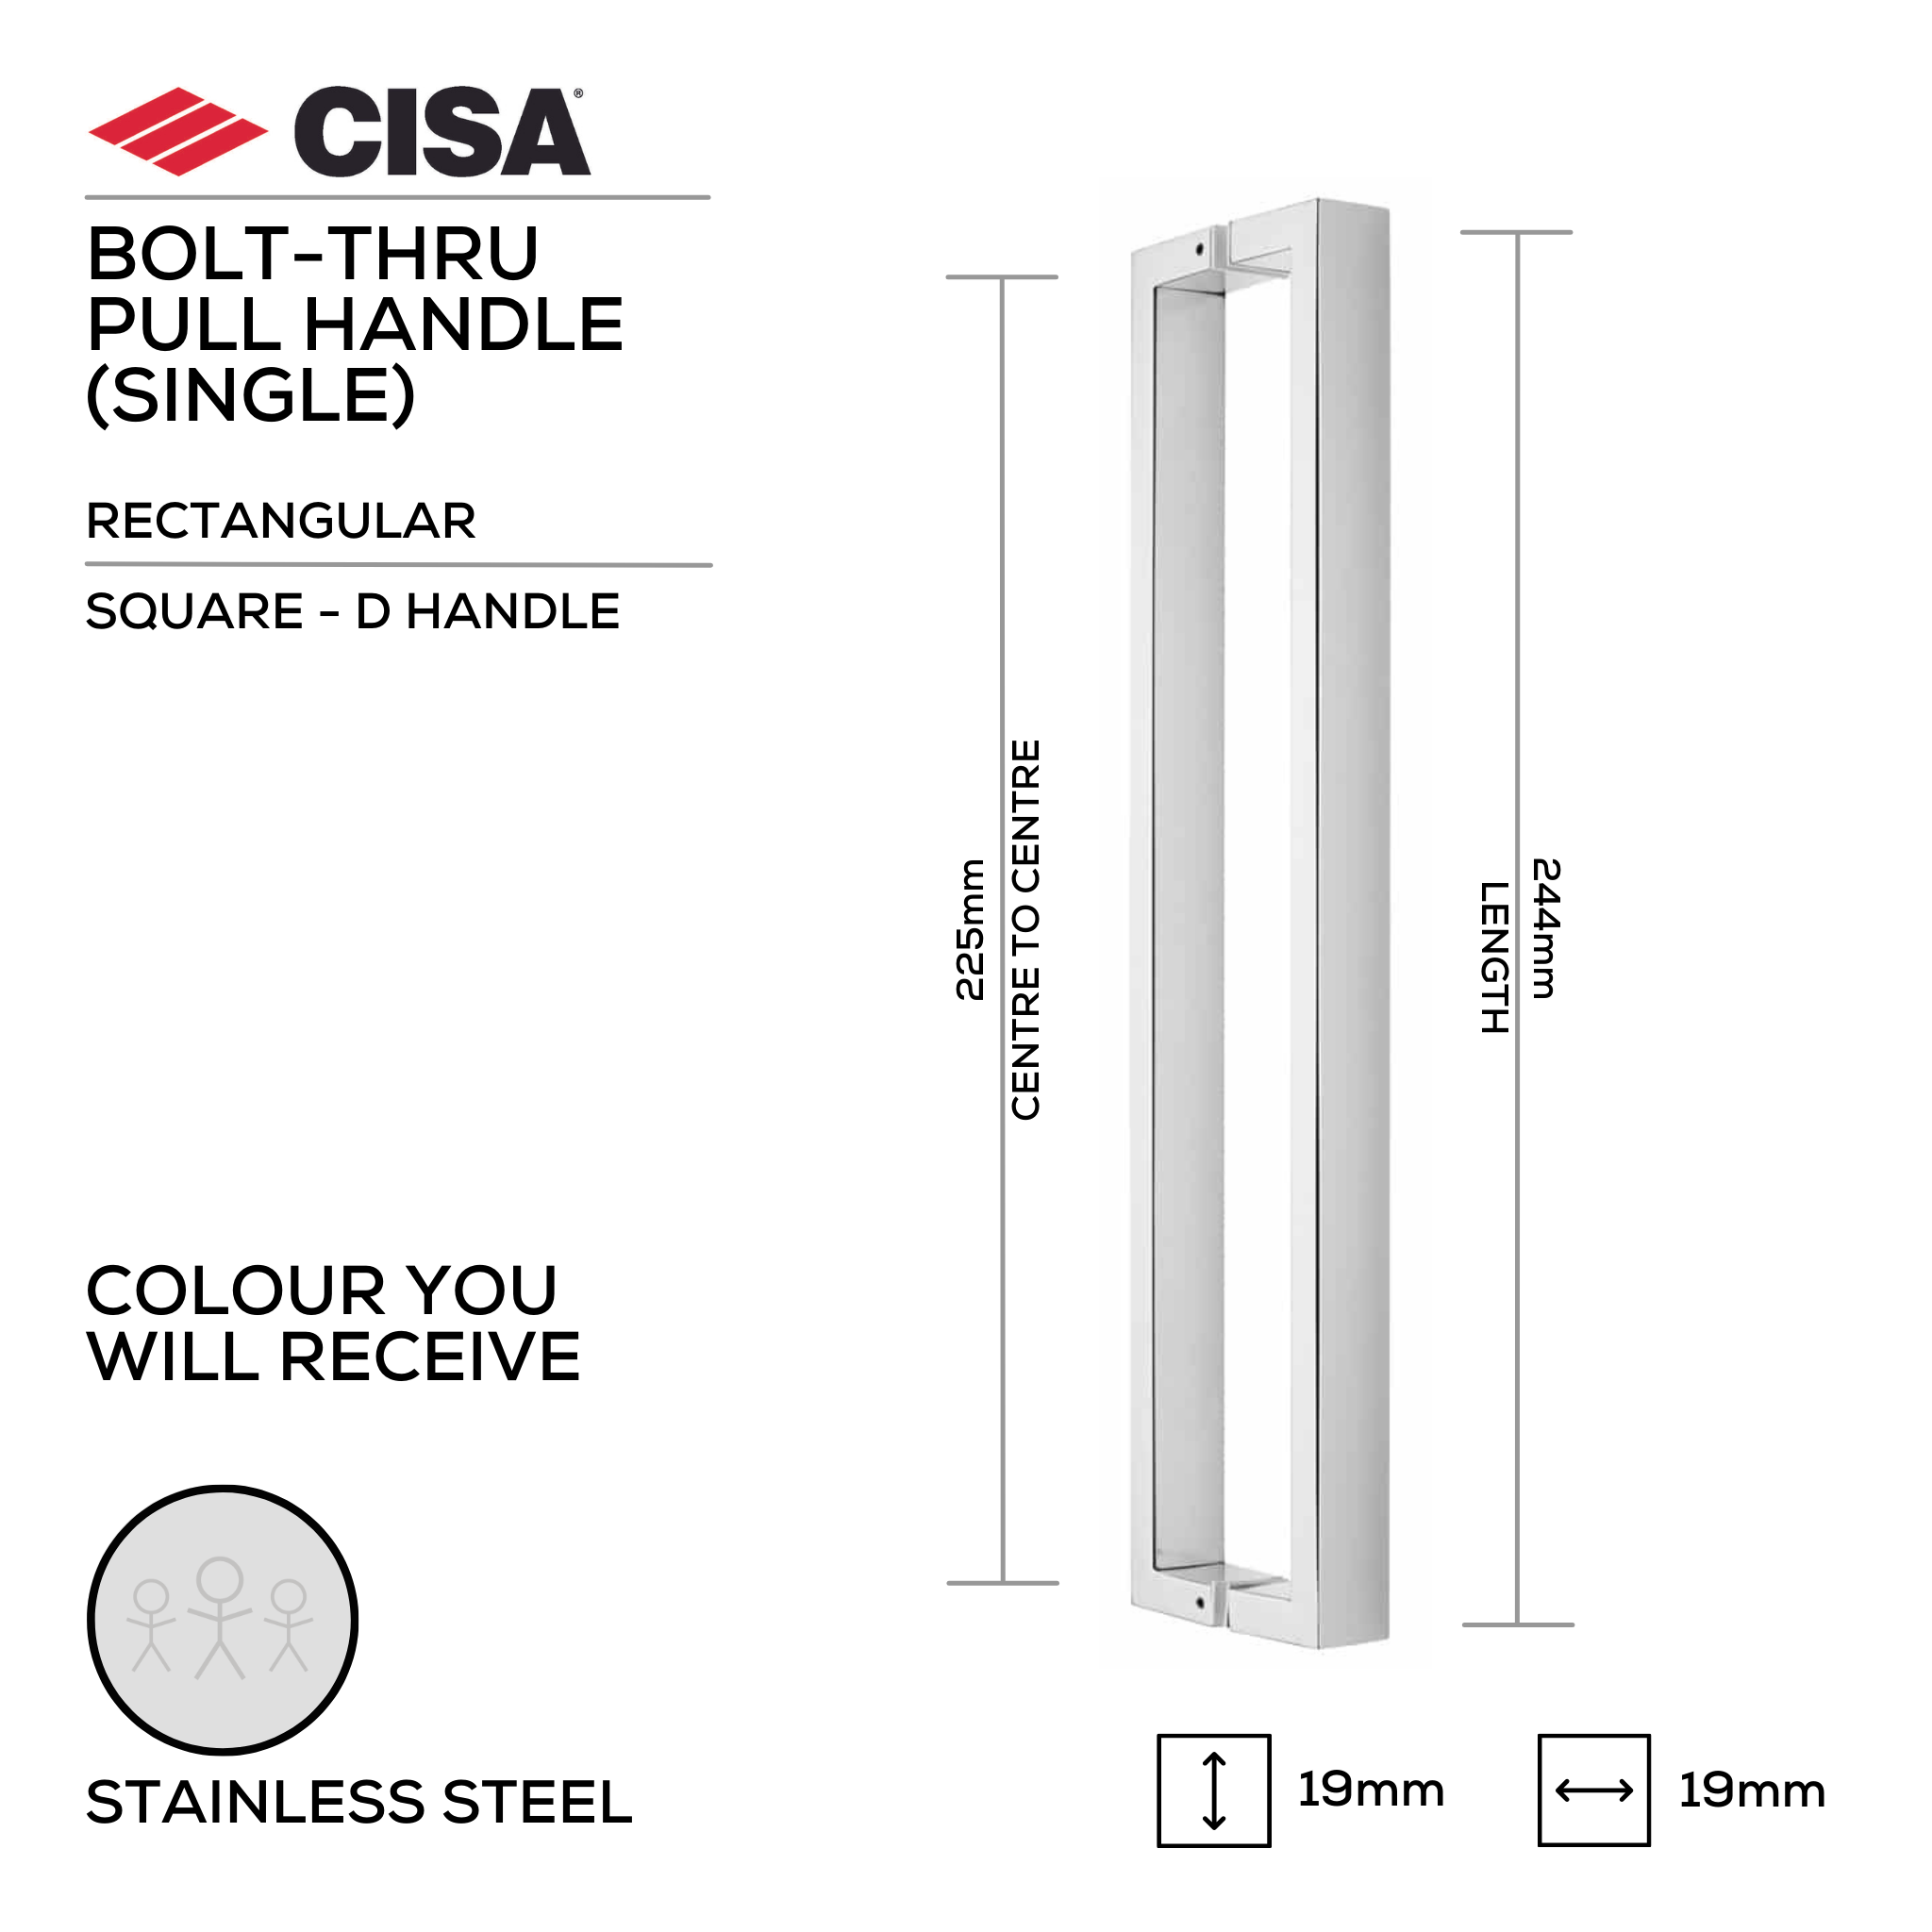 FP.SD01.BTF.SS, Pull Handle, Square, D Handle, BoltThru, 19mm (d) x 244mm (l) x 225mm (ctc), Stainless Steel, CISA